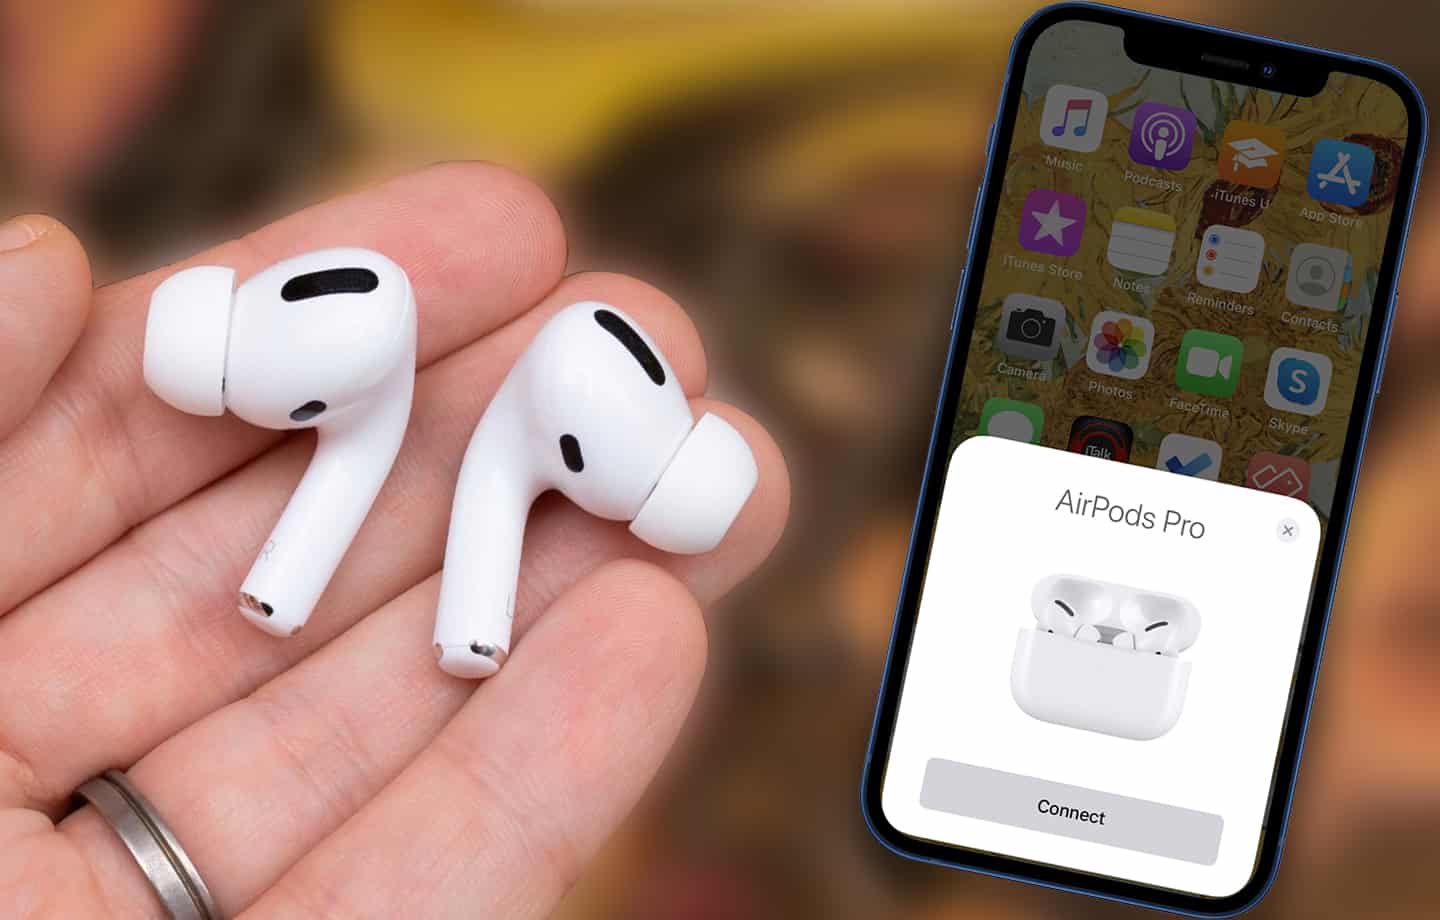 fløjl ledsager i dag Airpods Connected But No Sound? Here Are 5 Ways to Fix